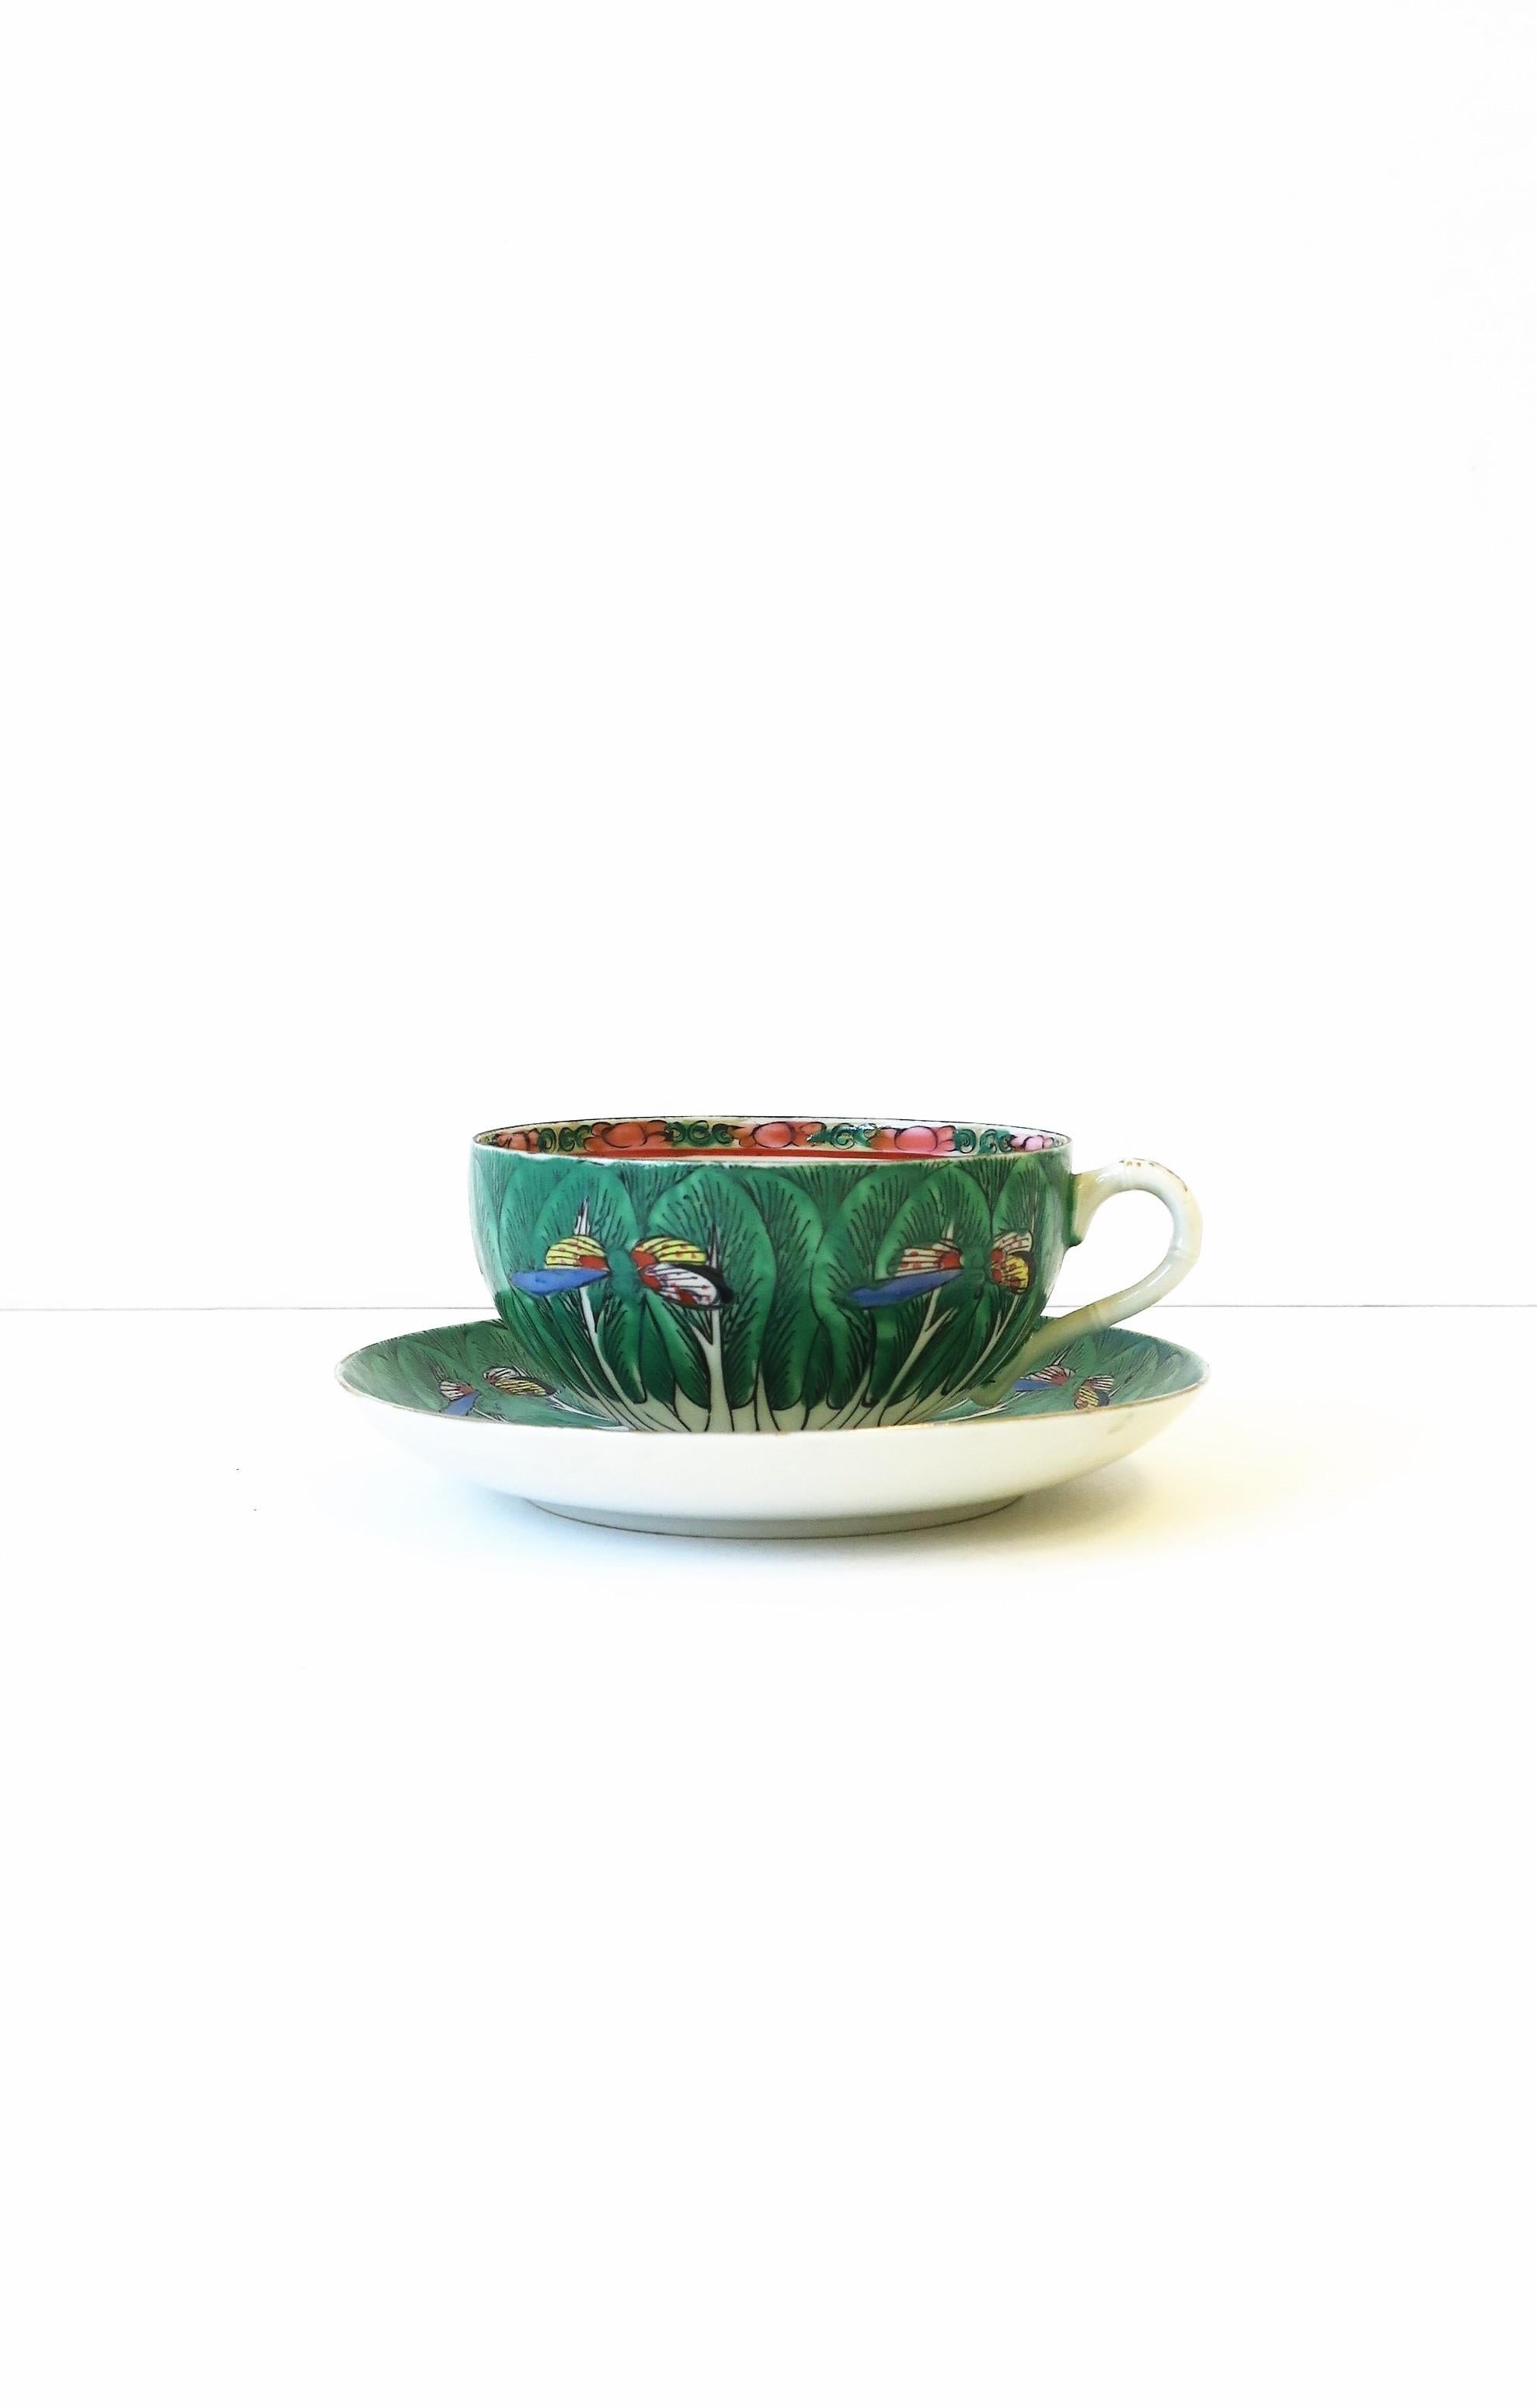 A very beautiful and rare porcelain Famille Verte cabbage leaf and butterfly pattern coffee or tea cup and saucer set, circa early 20th century, Chinese Export. Porcelain is covered in a leaf and butterfly pattern, painted in beautiful rich hues;